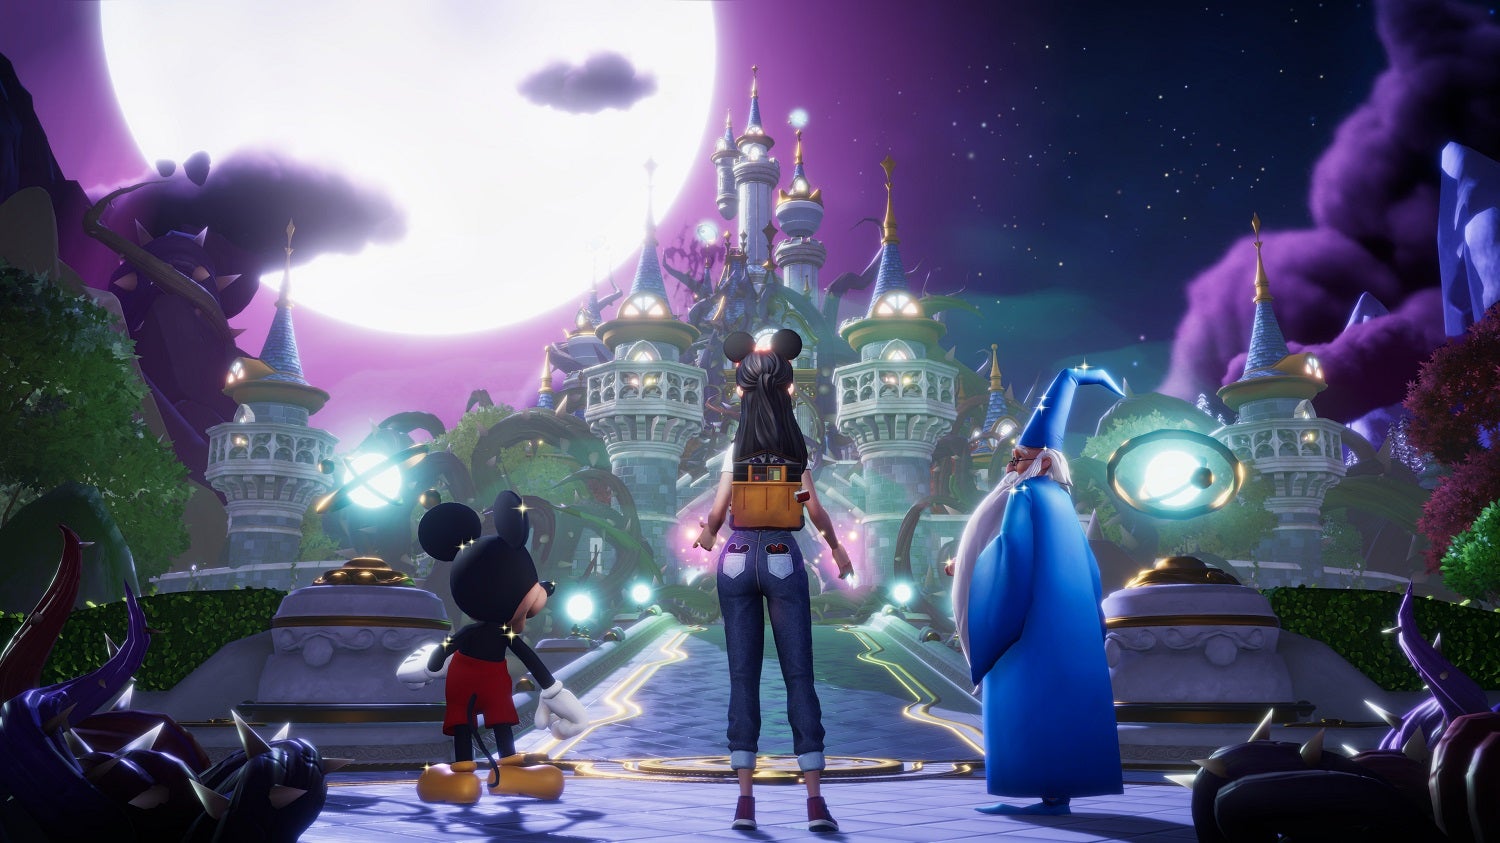 Image for Disney Dreamlight Valley amasses a player base of 1m